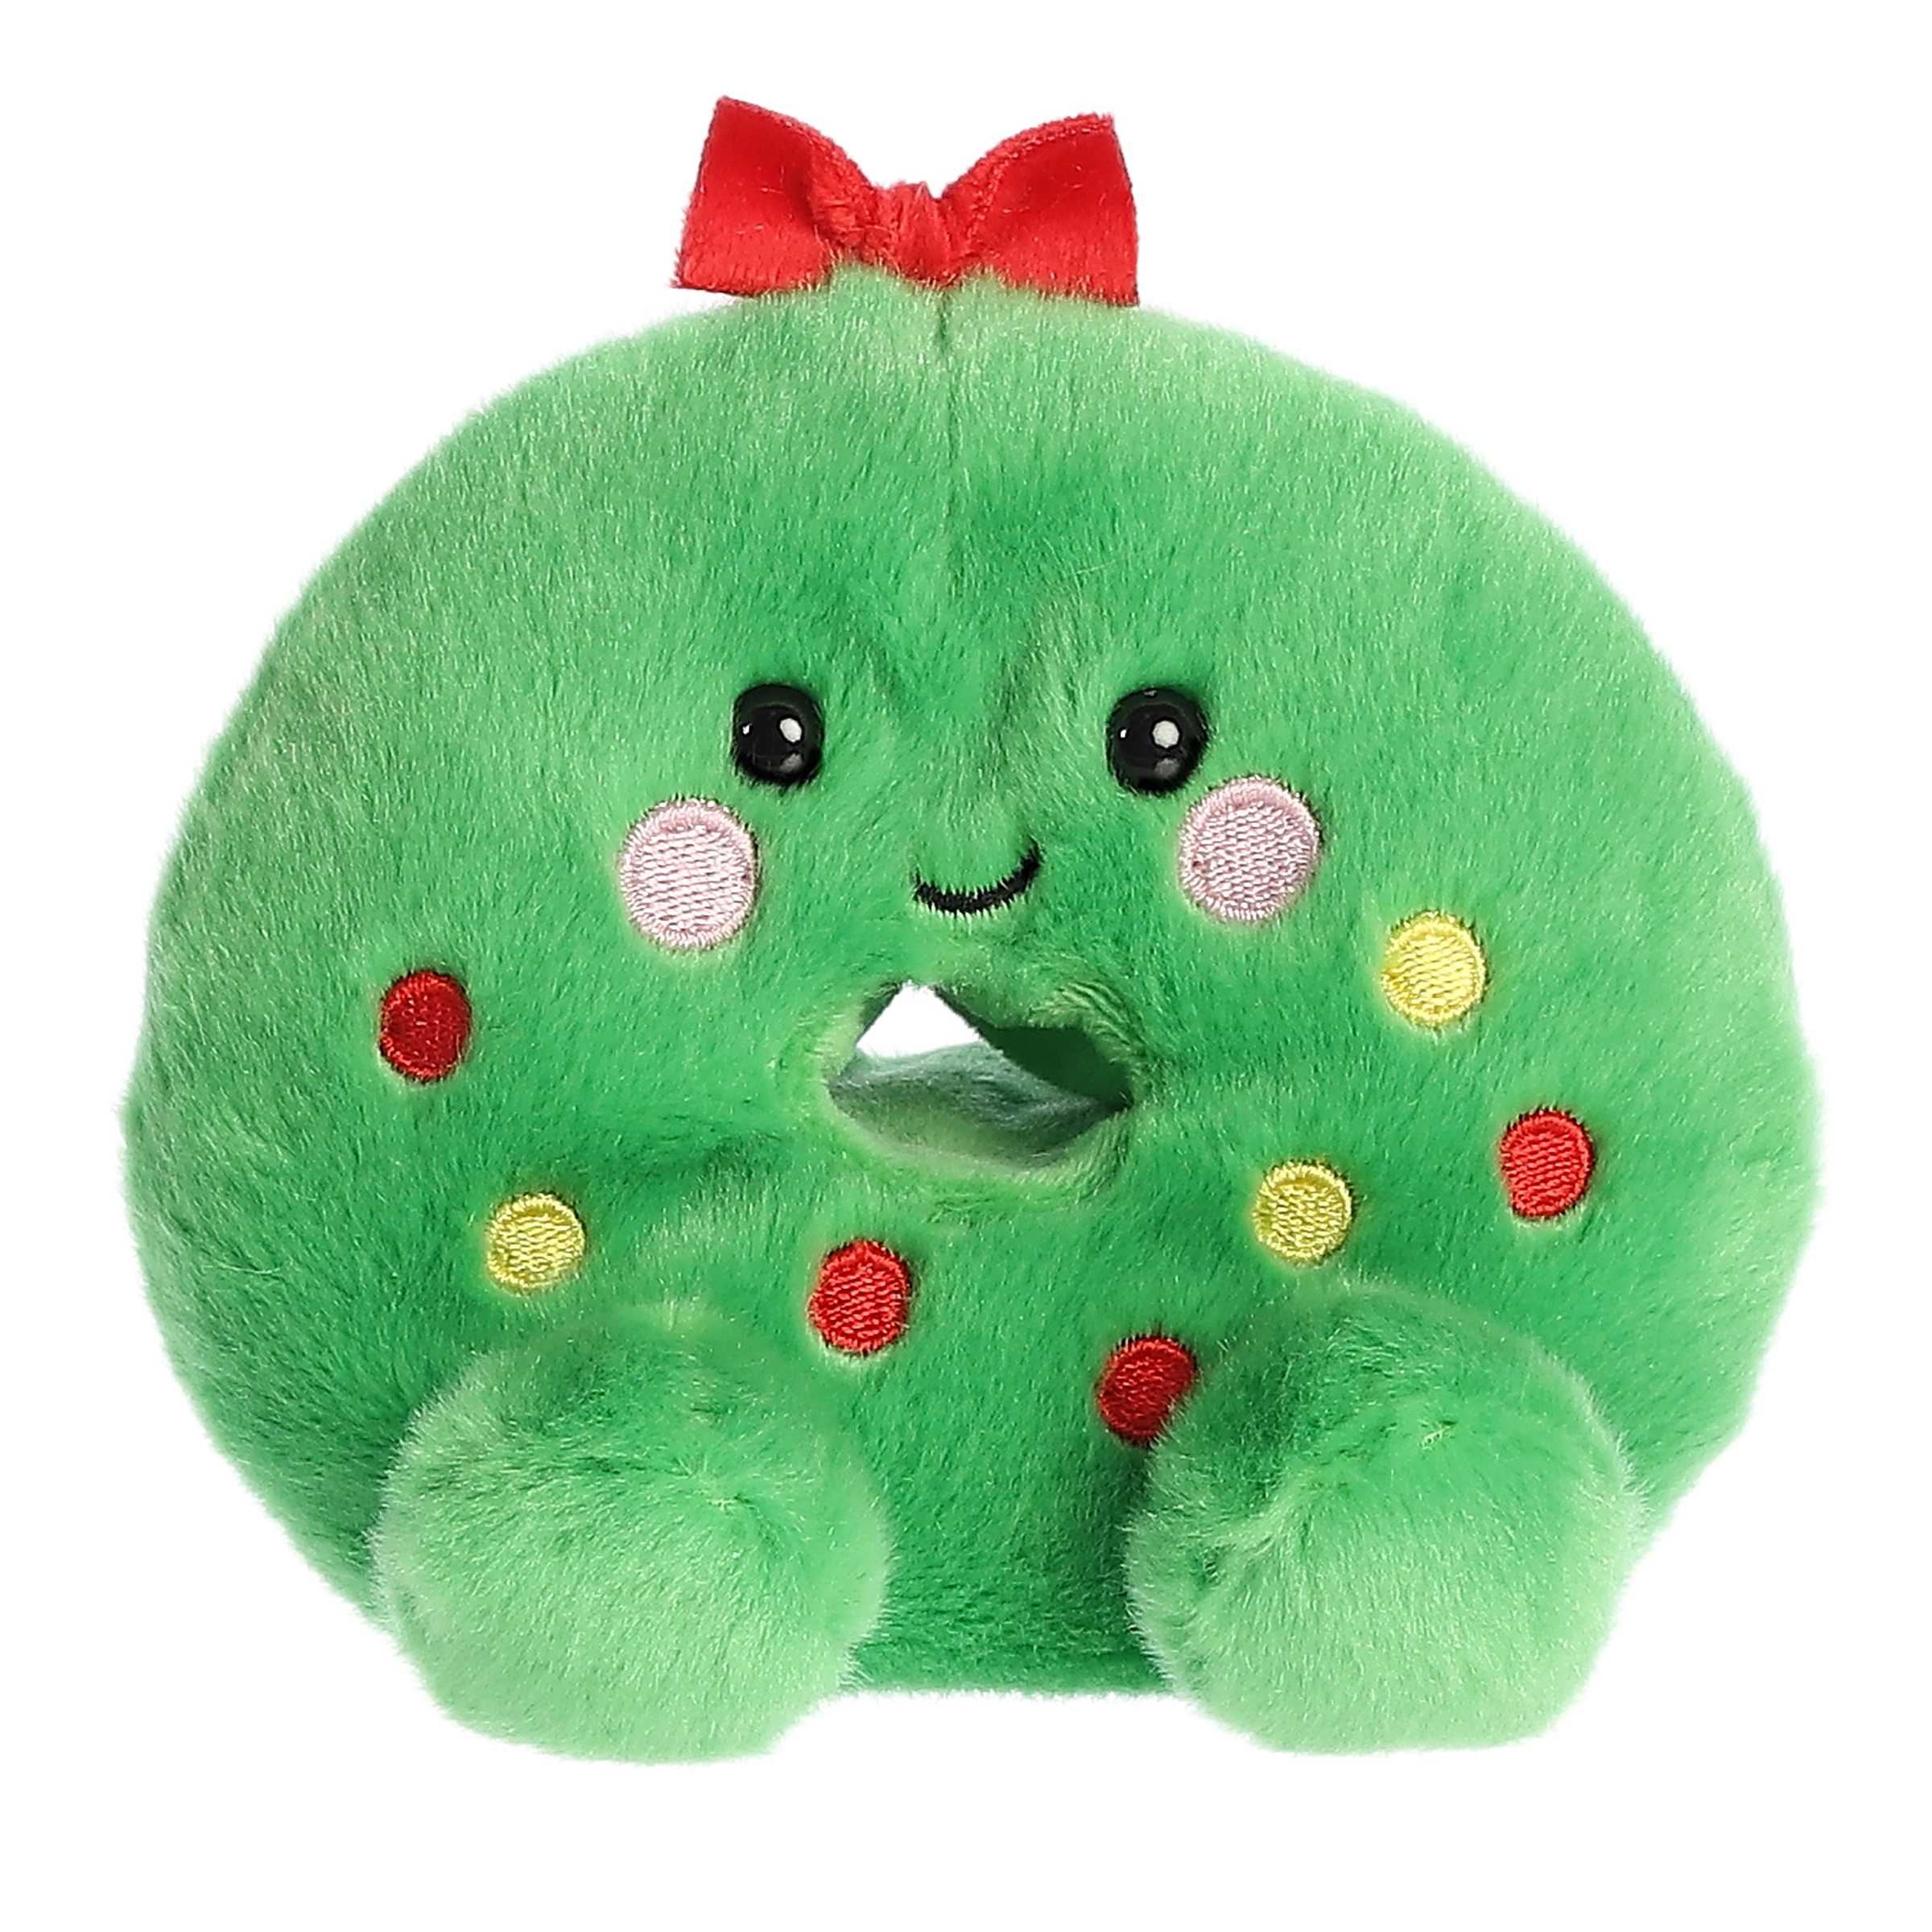 Adorable, happy mini green wreath plush toy sitting speckled with tiny ornaments and topped with a bow